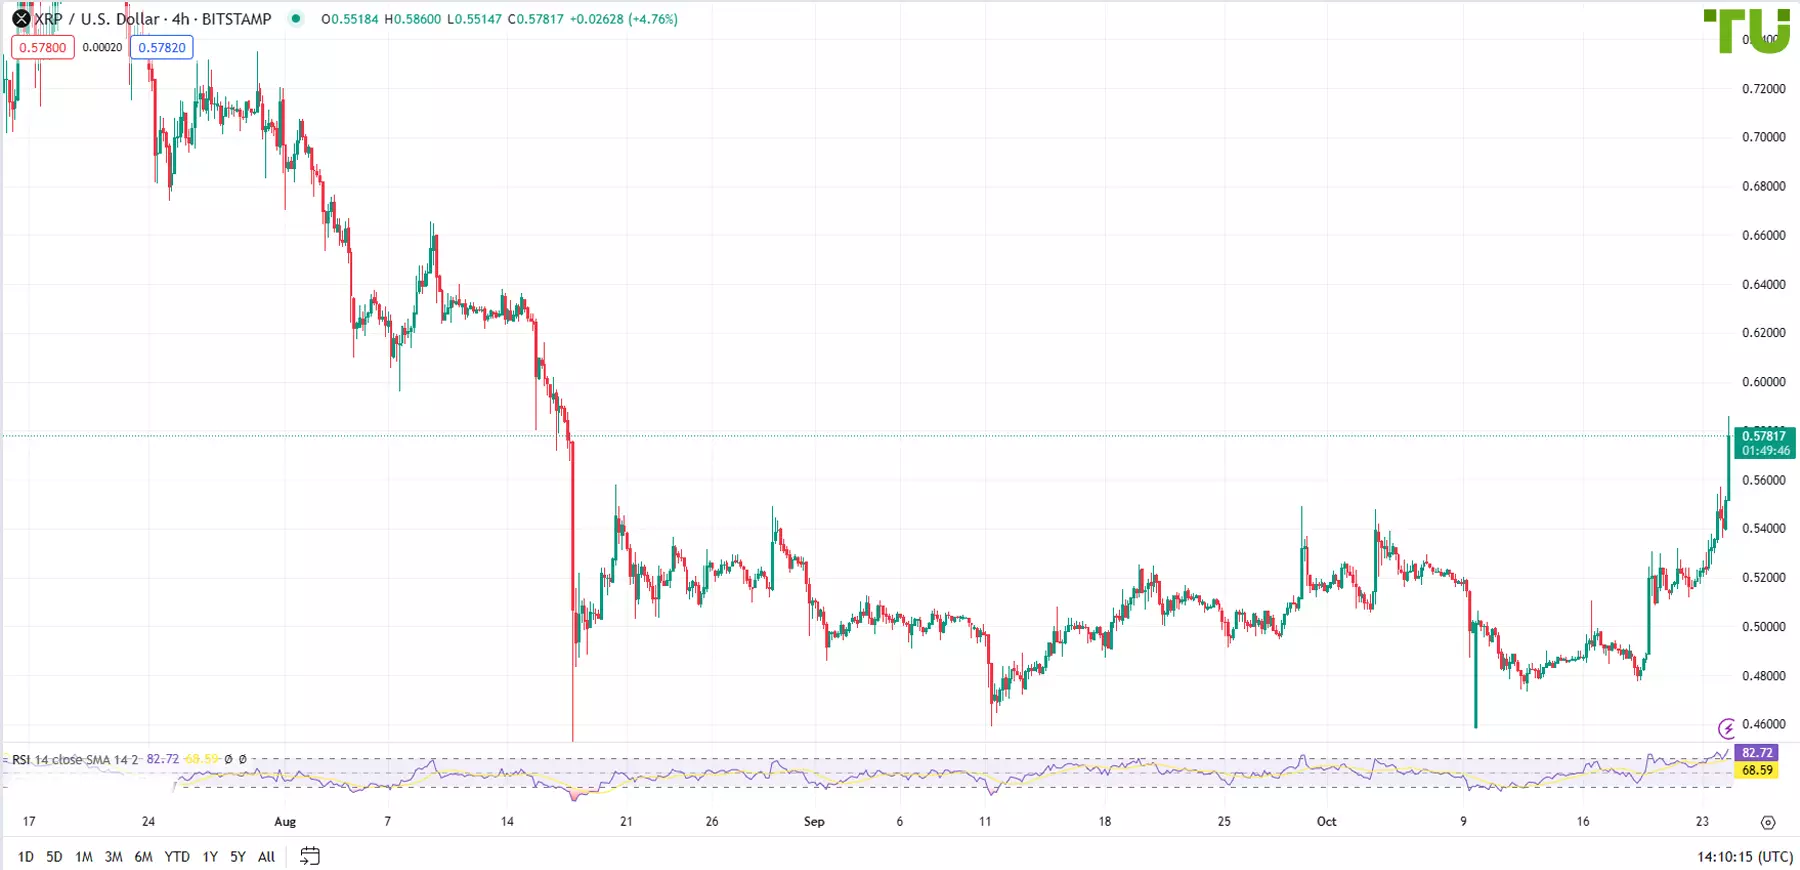 XRP/USD broke through several resistances and tested 0.58510